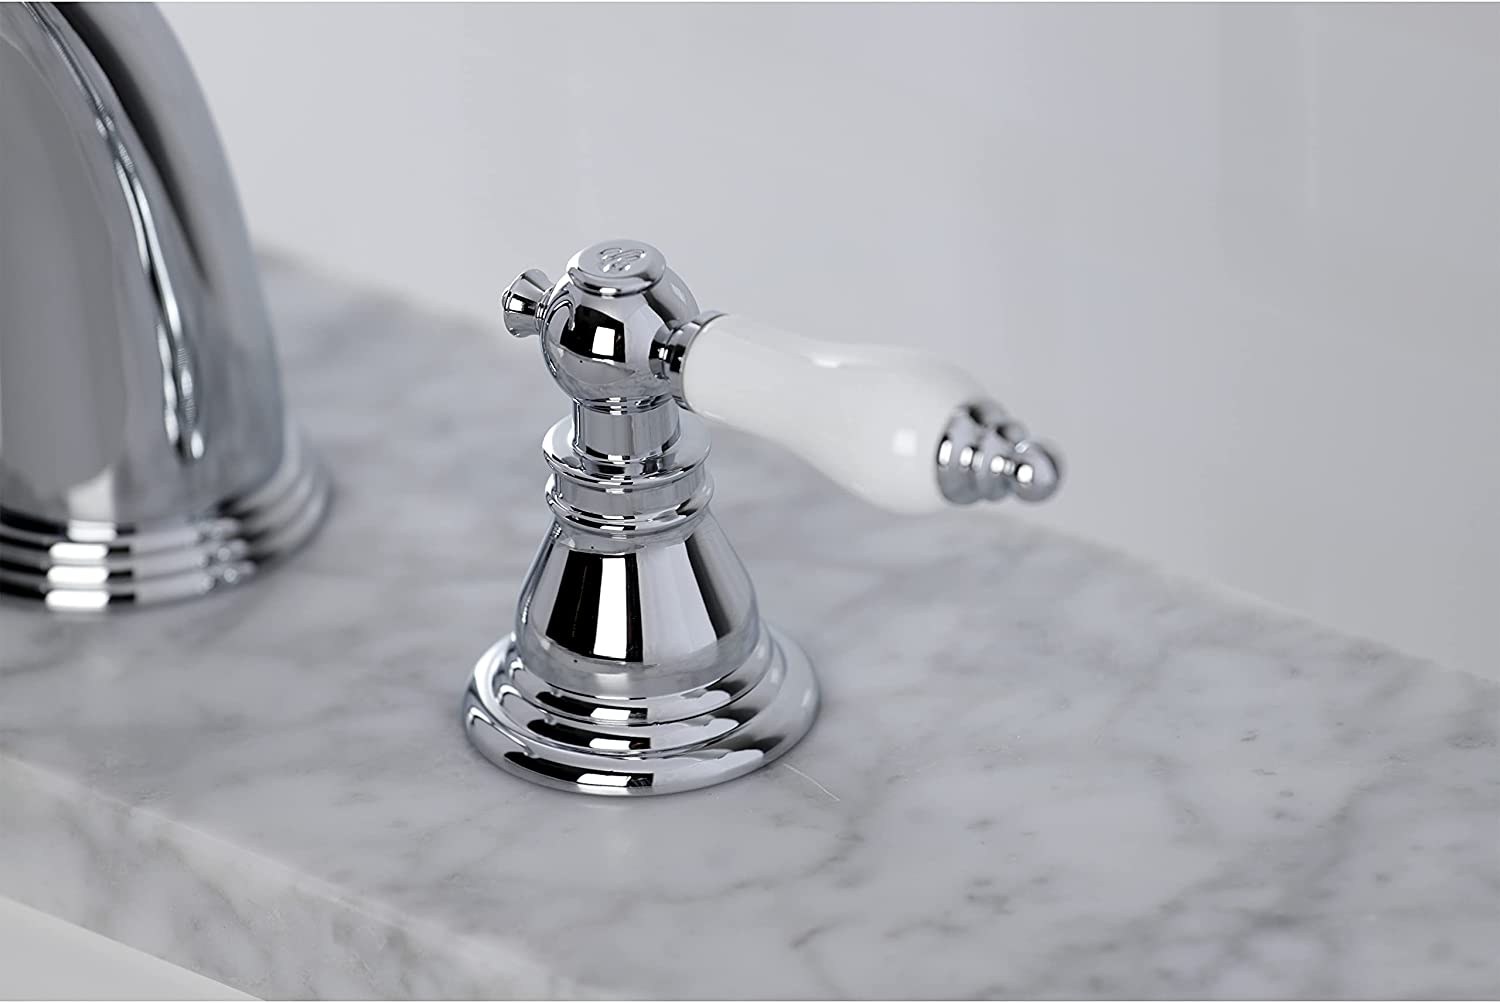 Kingston Brass KB981APL American Patriot Widespread Bathroom Faucet, Polished Chrome